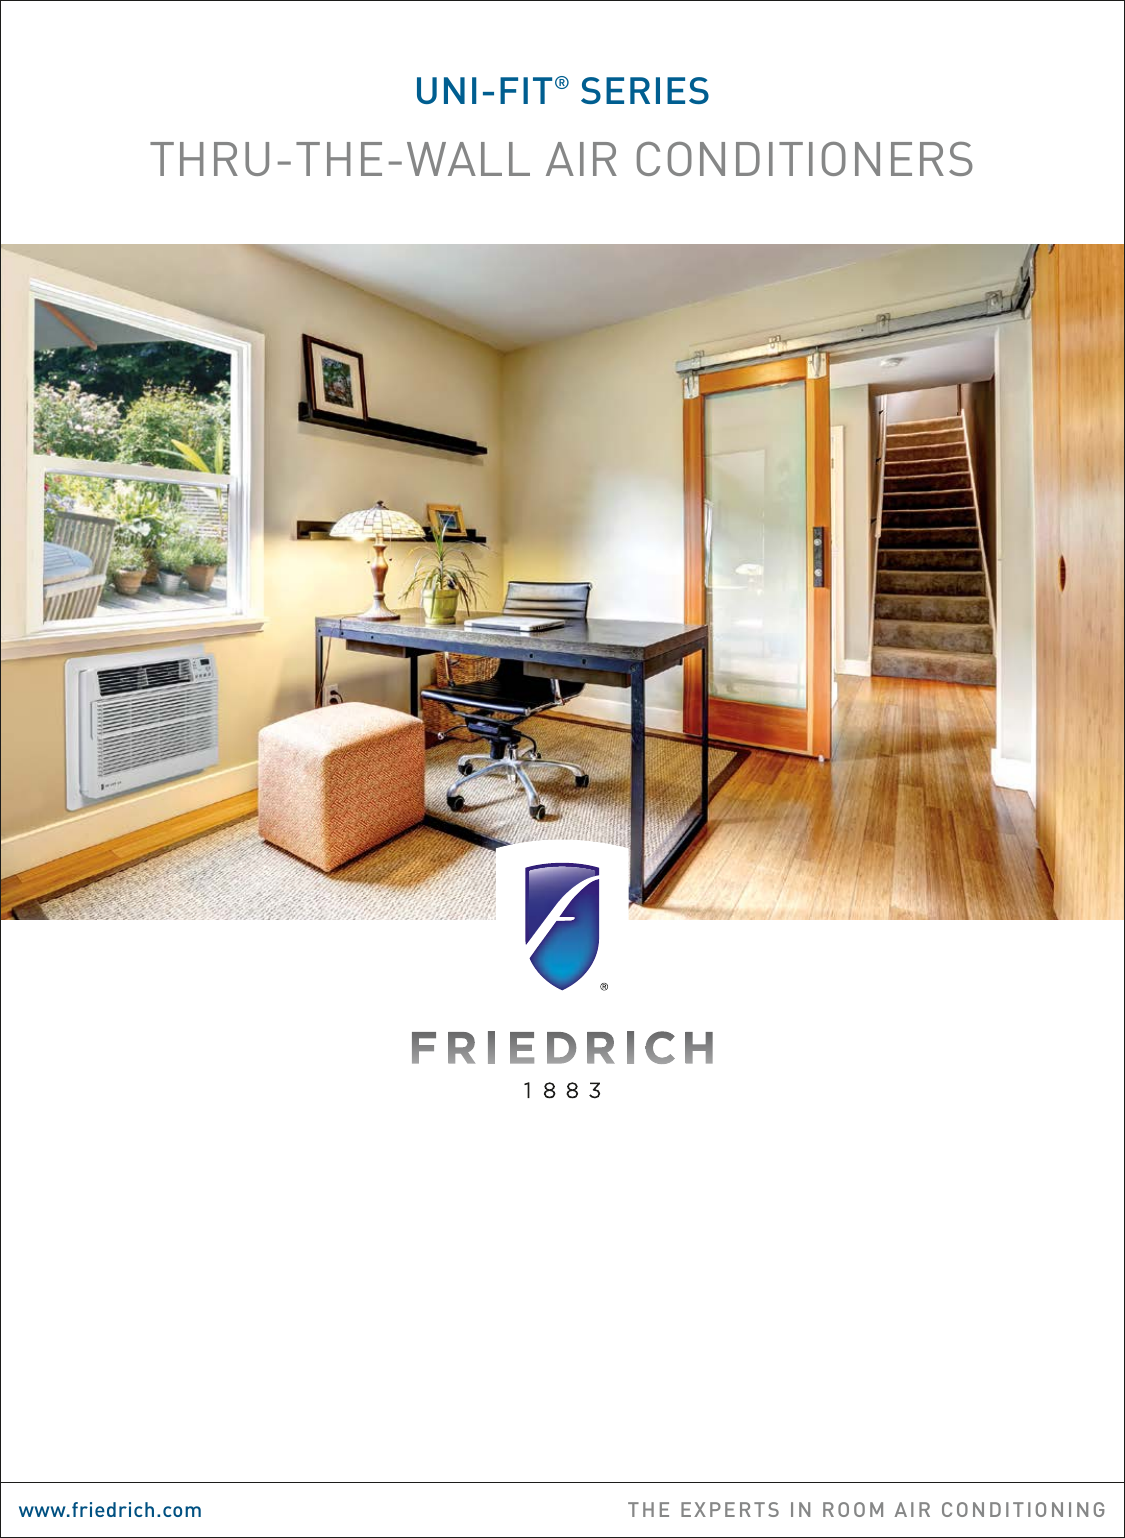 Page 1 of 4 - Friedrich  2018 Uni-fit Thru-the-wall Air Conditioners Brochure